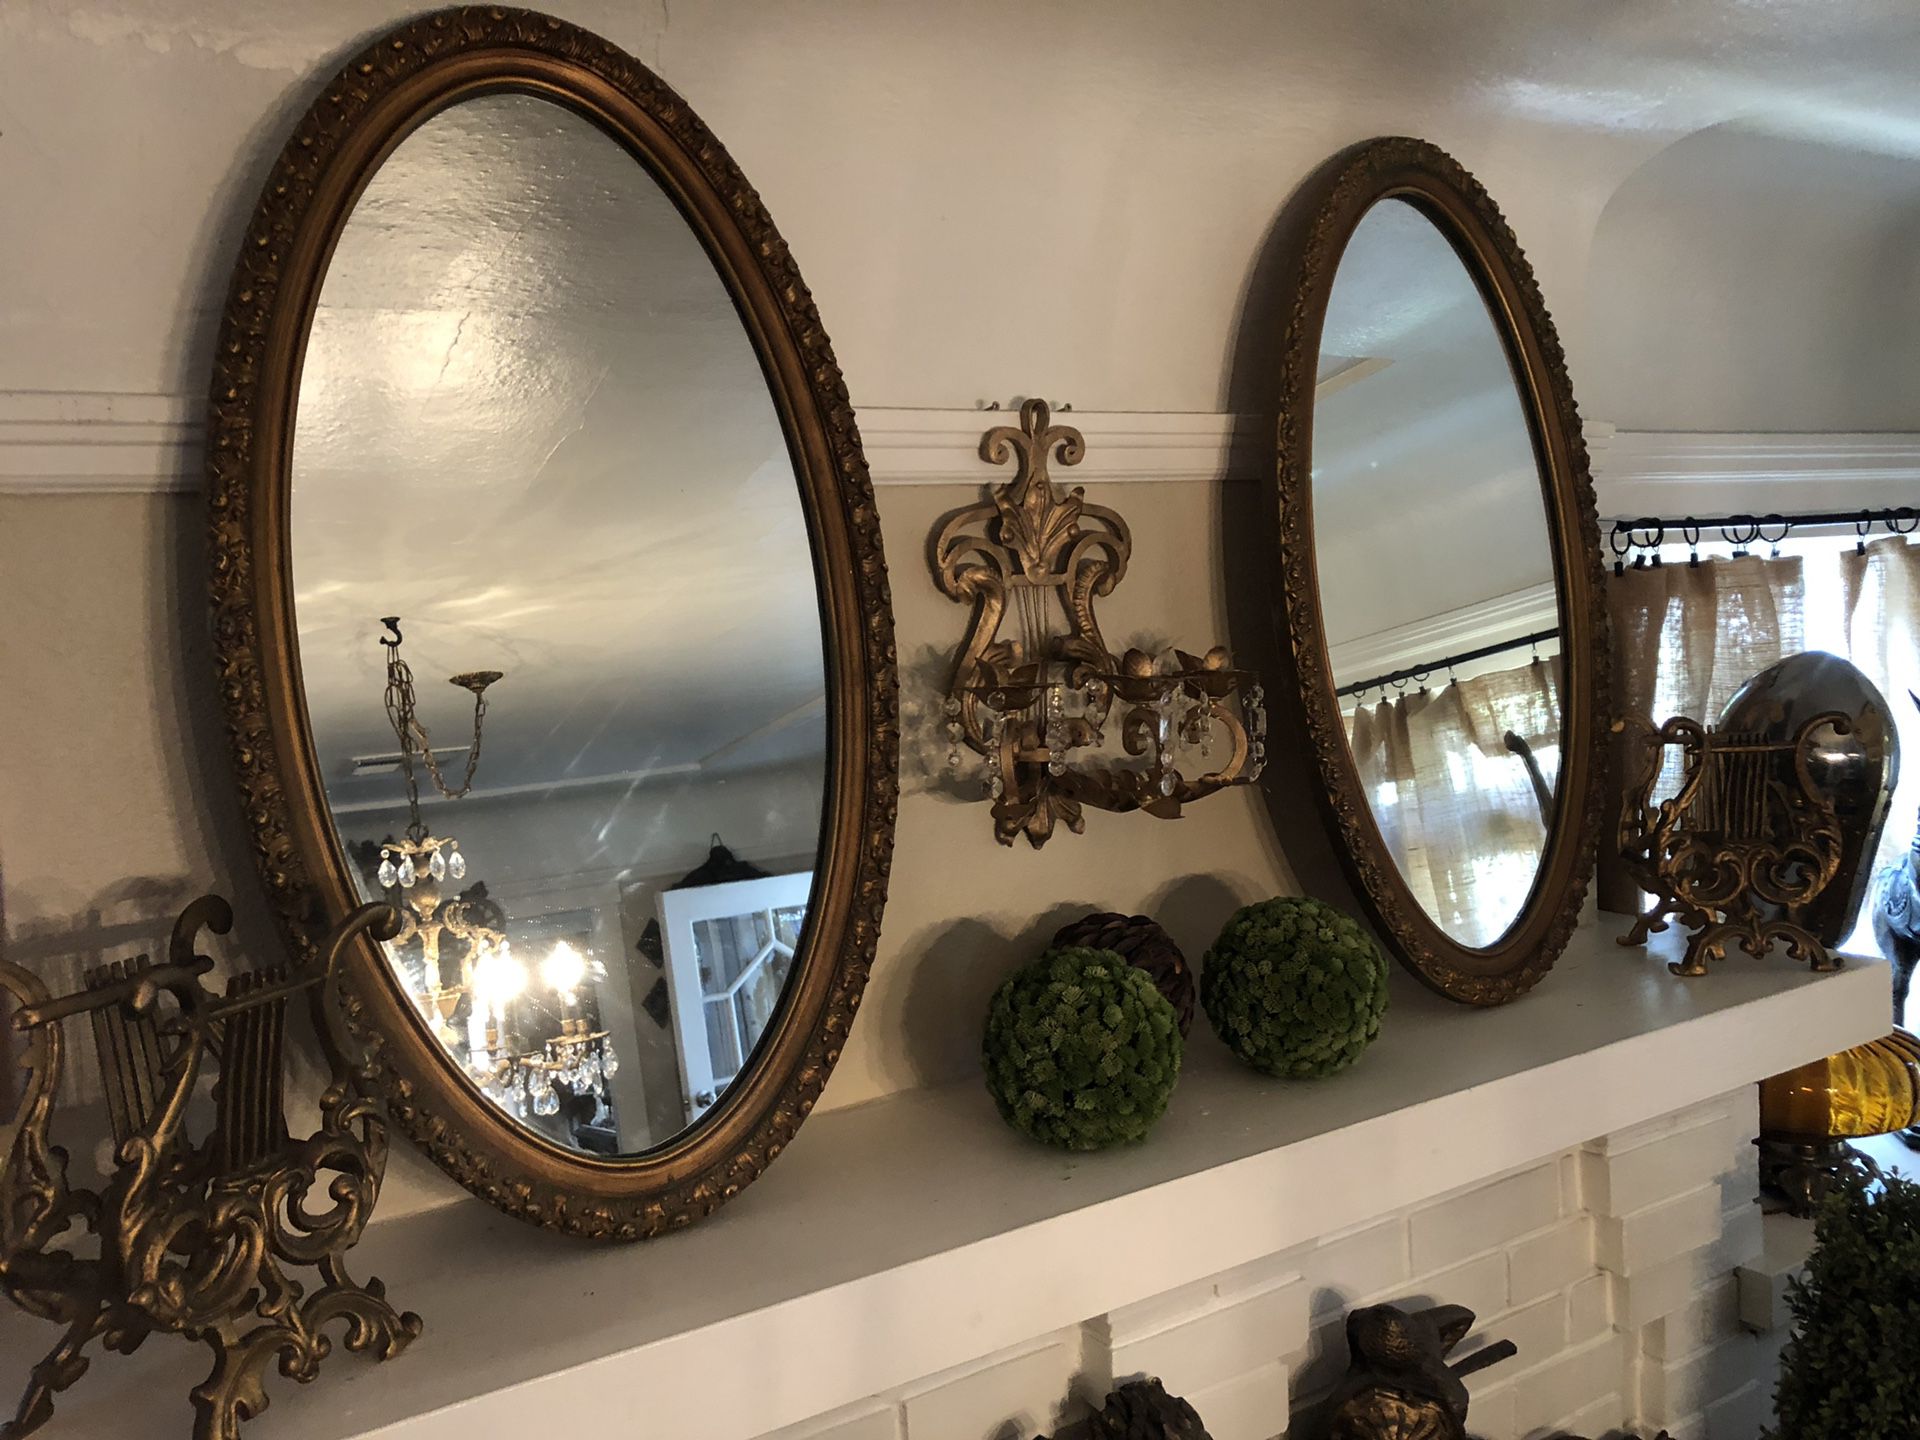 34x18 vintage pair of oval mirrors $60 pair firm!